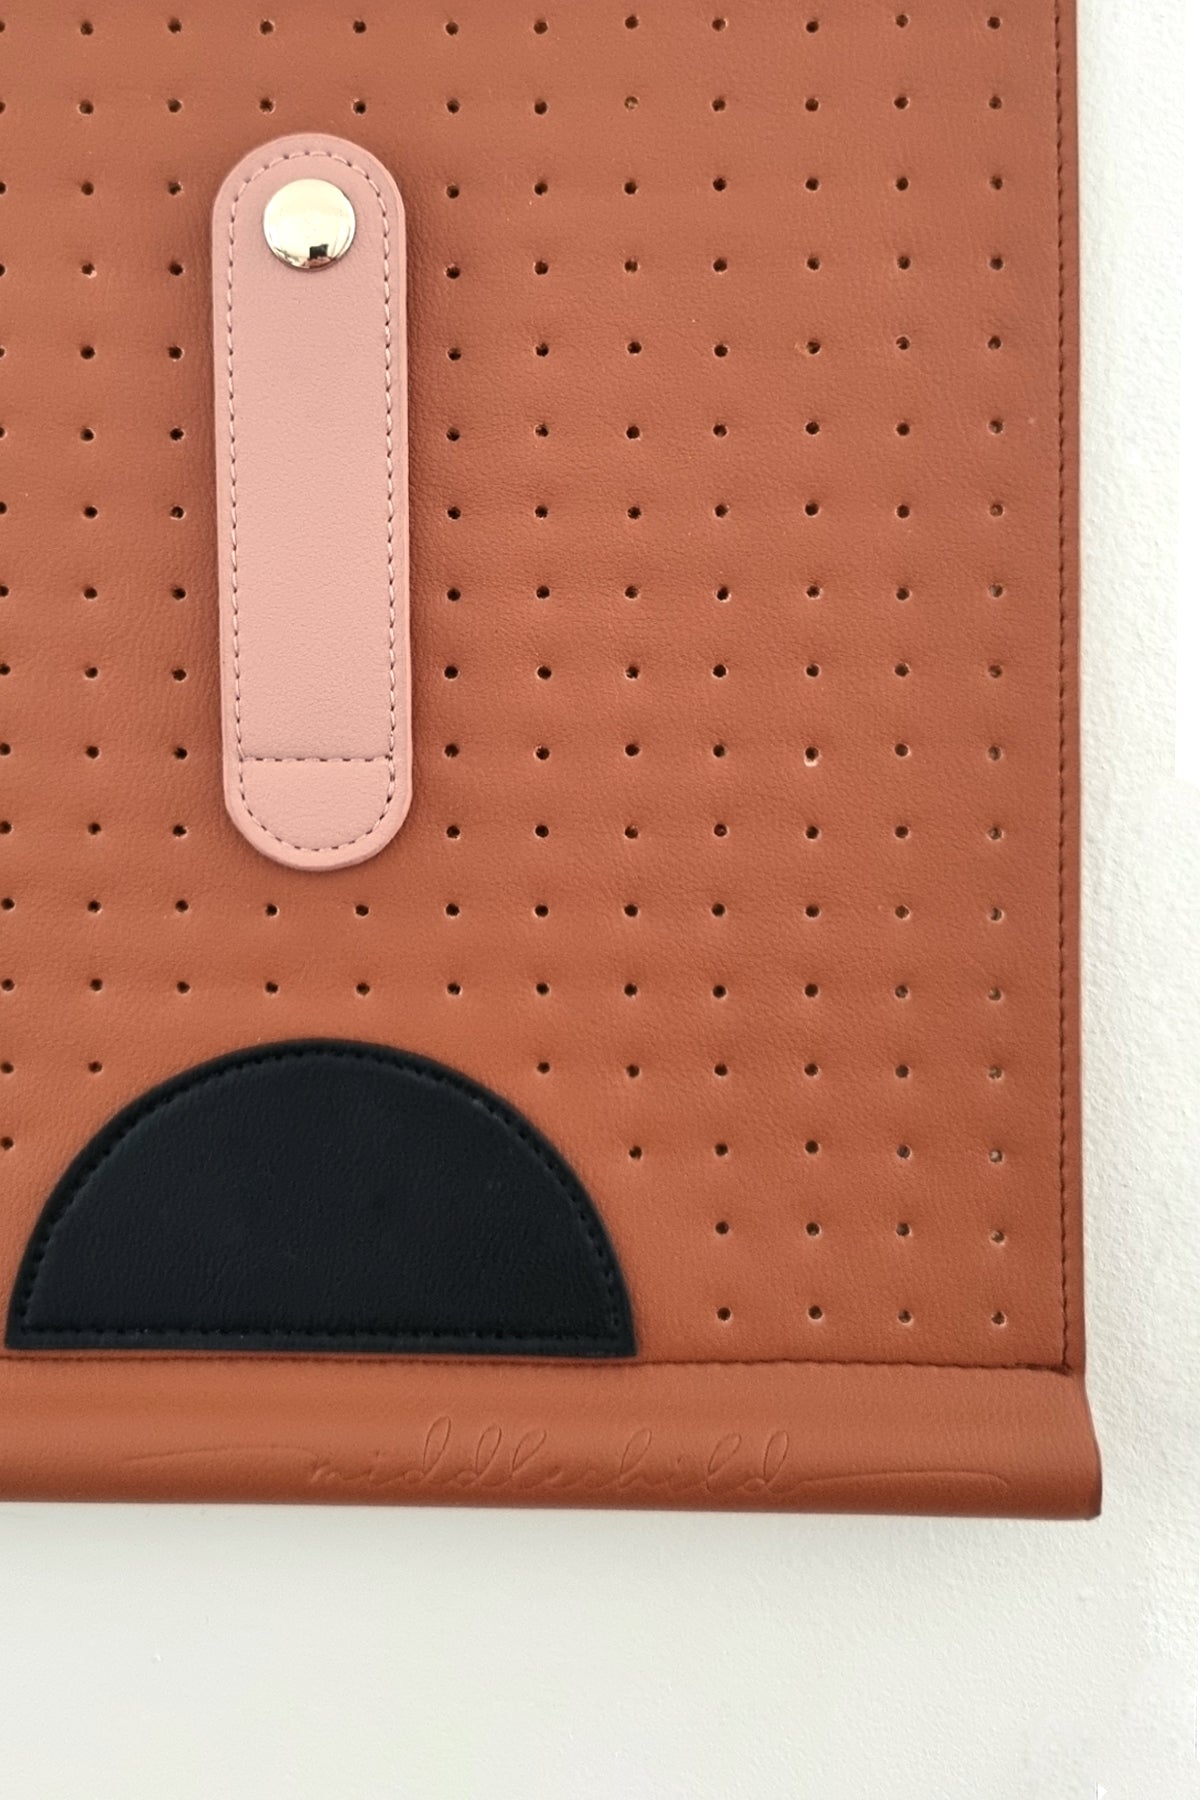 A close up image shows the detail of the wall hanging in tan. It shows the detail of the elongated peach oval with button clasp and stitch detail, the small black half circle, and the embossed script that says middlechild on the bottom edge of the wall hanging.